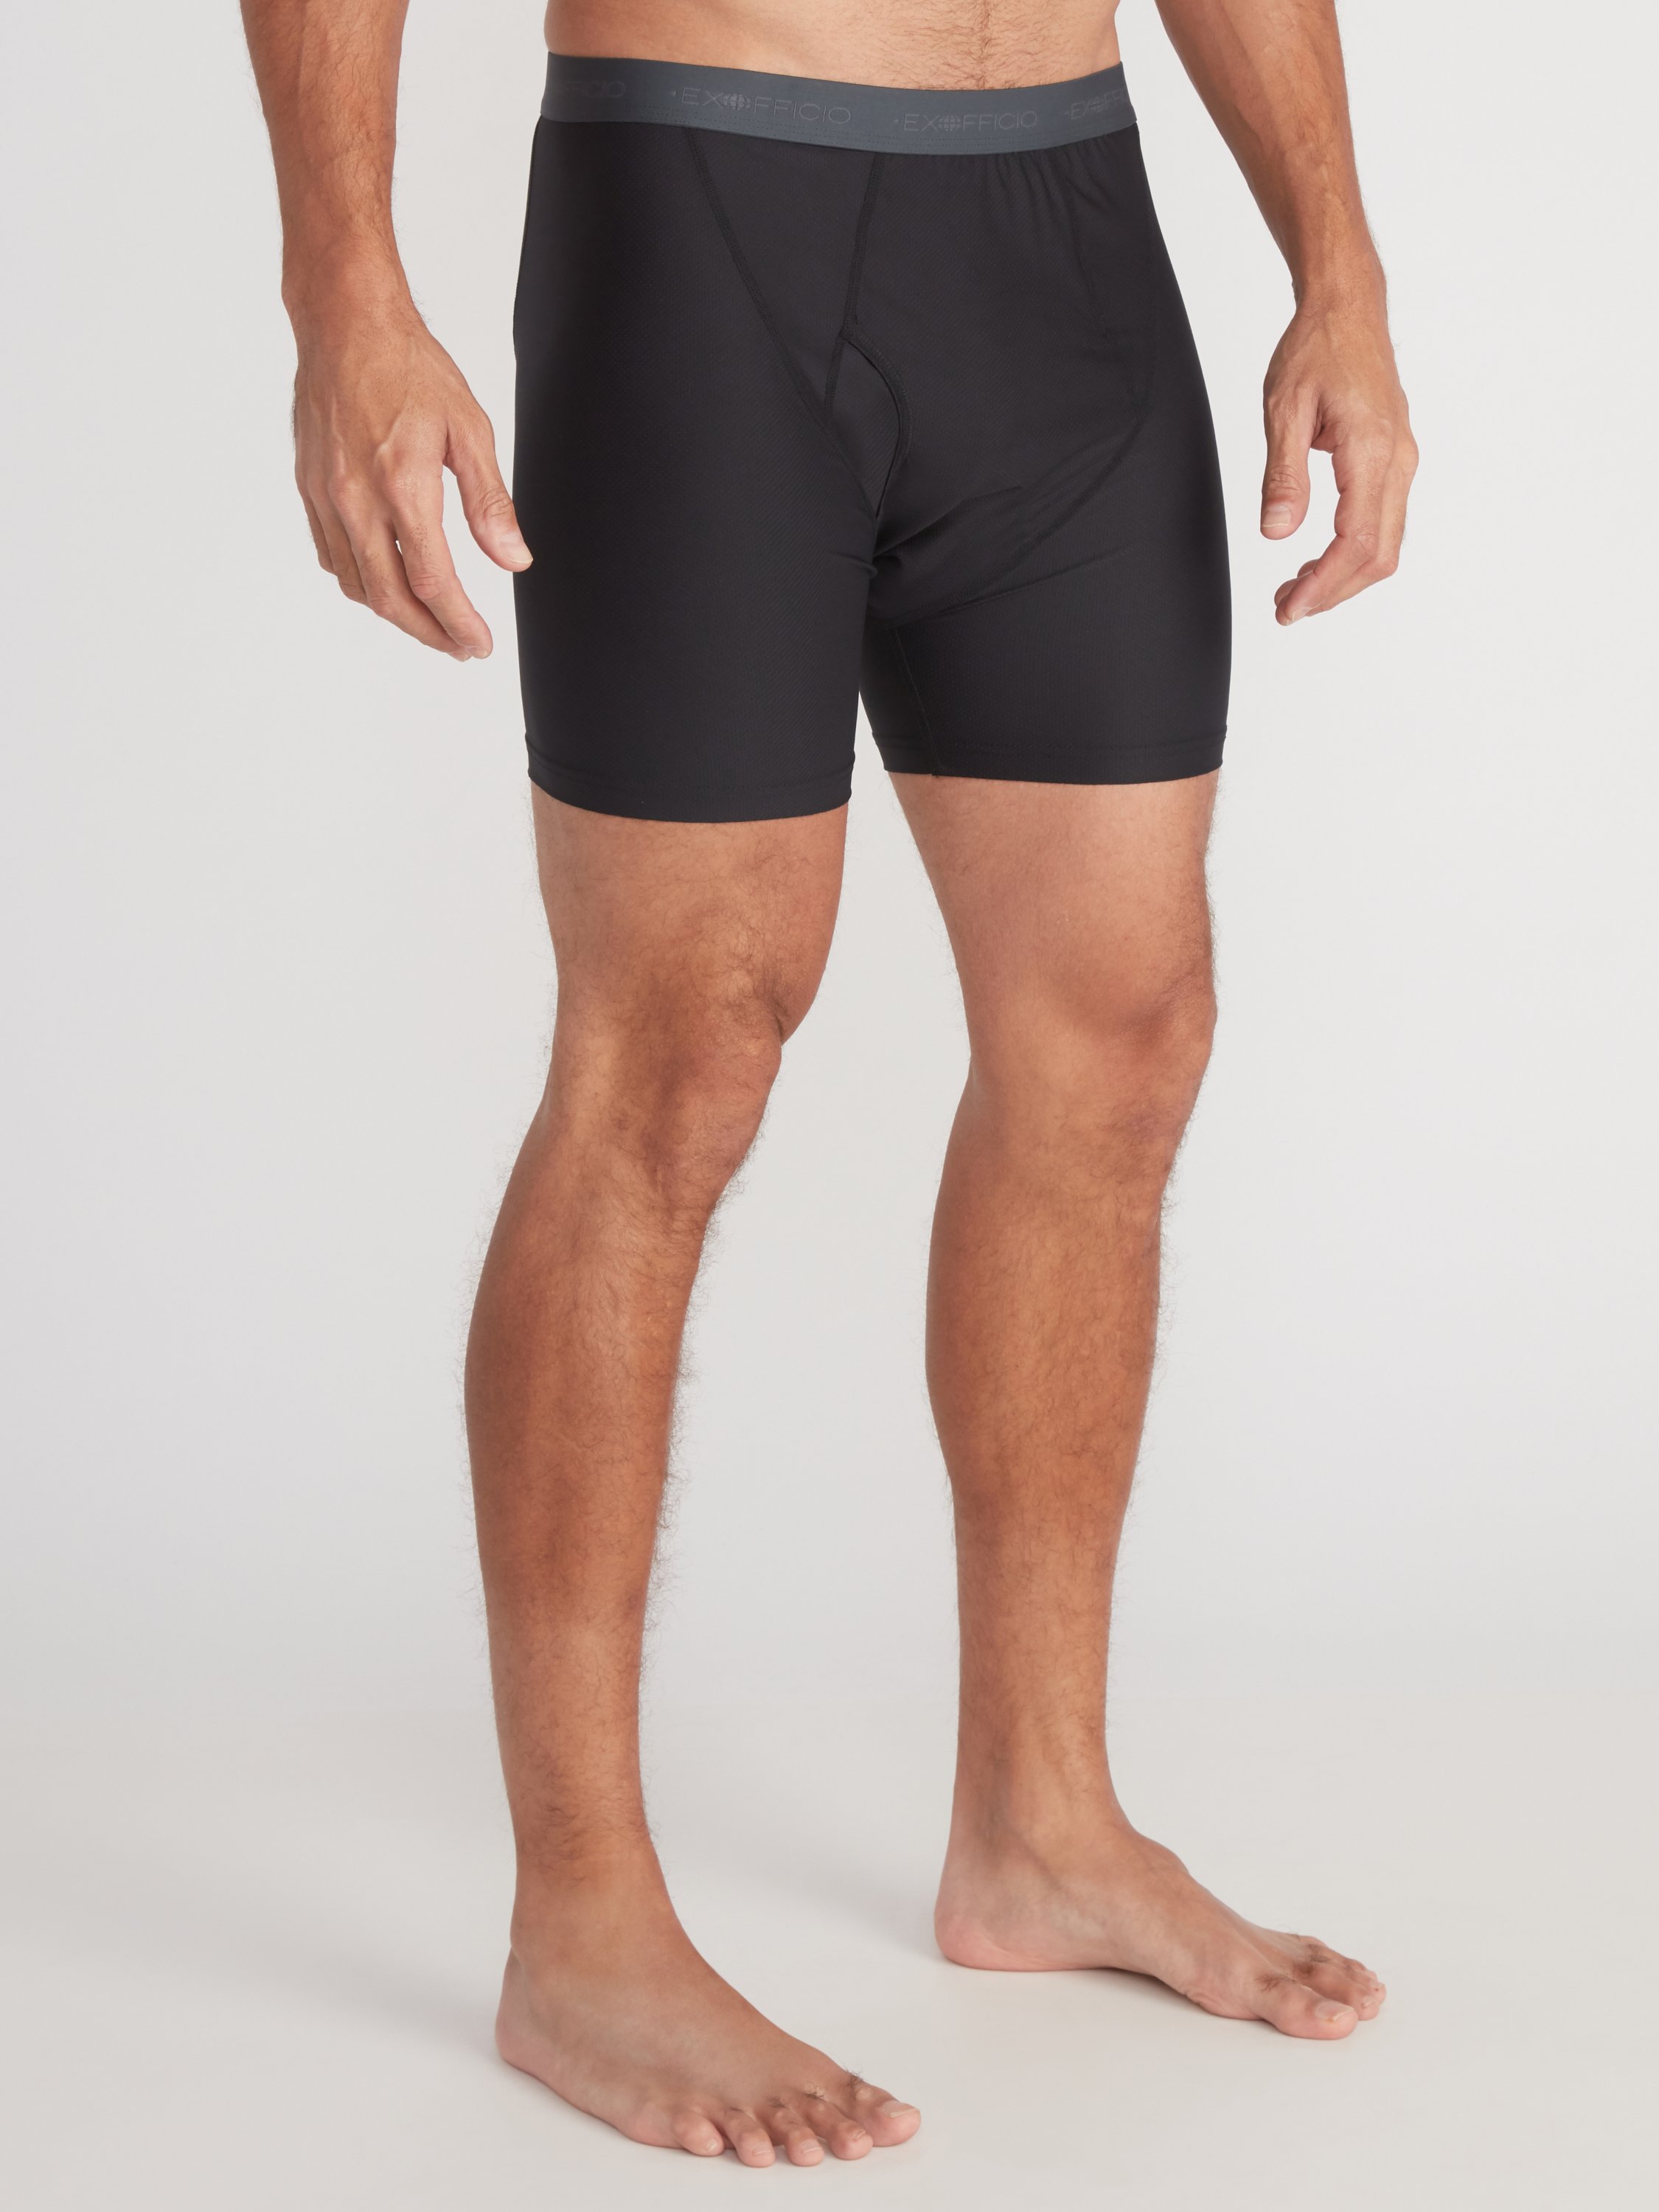 ExOfficio Men's Give-N-Go Boxer - Stay Dry and Comfortable on Your Next  Adventure!